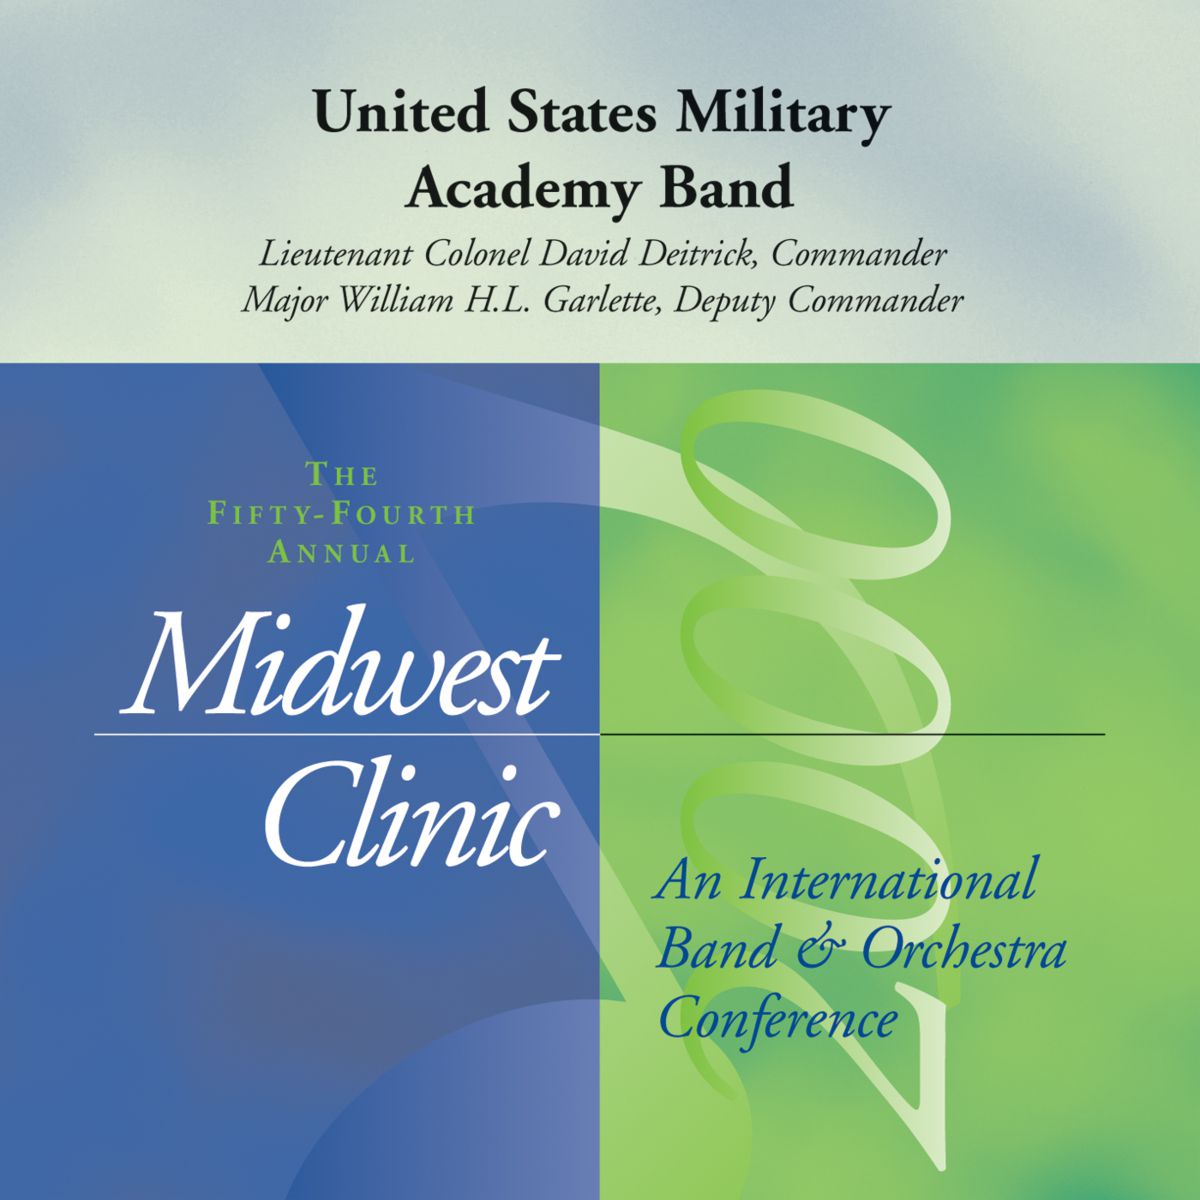 2000 Midwest Clinic: United States Military Academy Band - hacer clic aqu